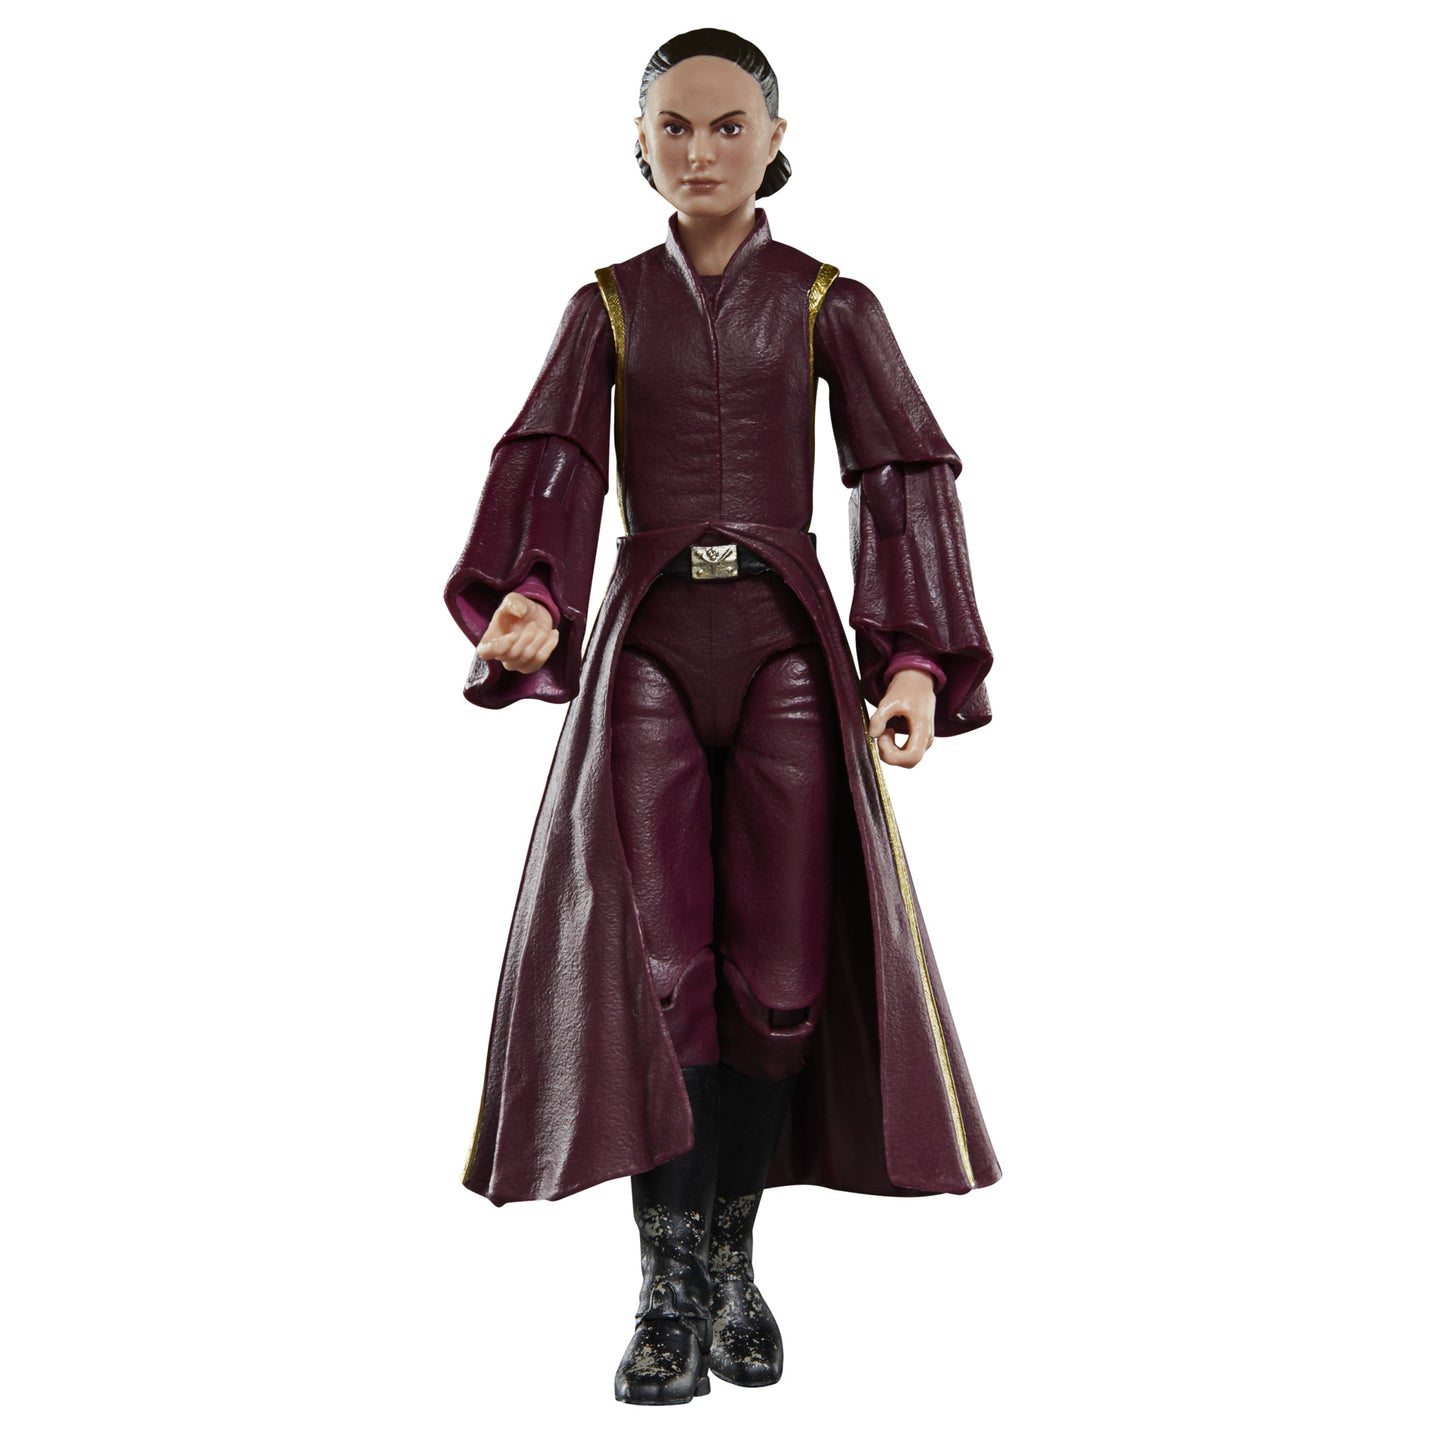 [PRE-ORDER] Star Wars The Black Series Padmé Amidala, Star Wars: The Phantom Menace Collectible 6 Inch Action Figure, Ages 4 and Up